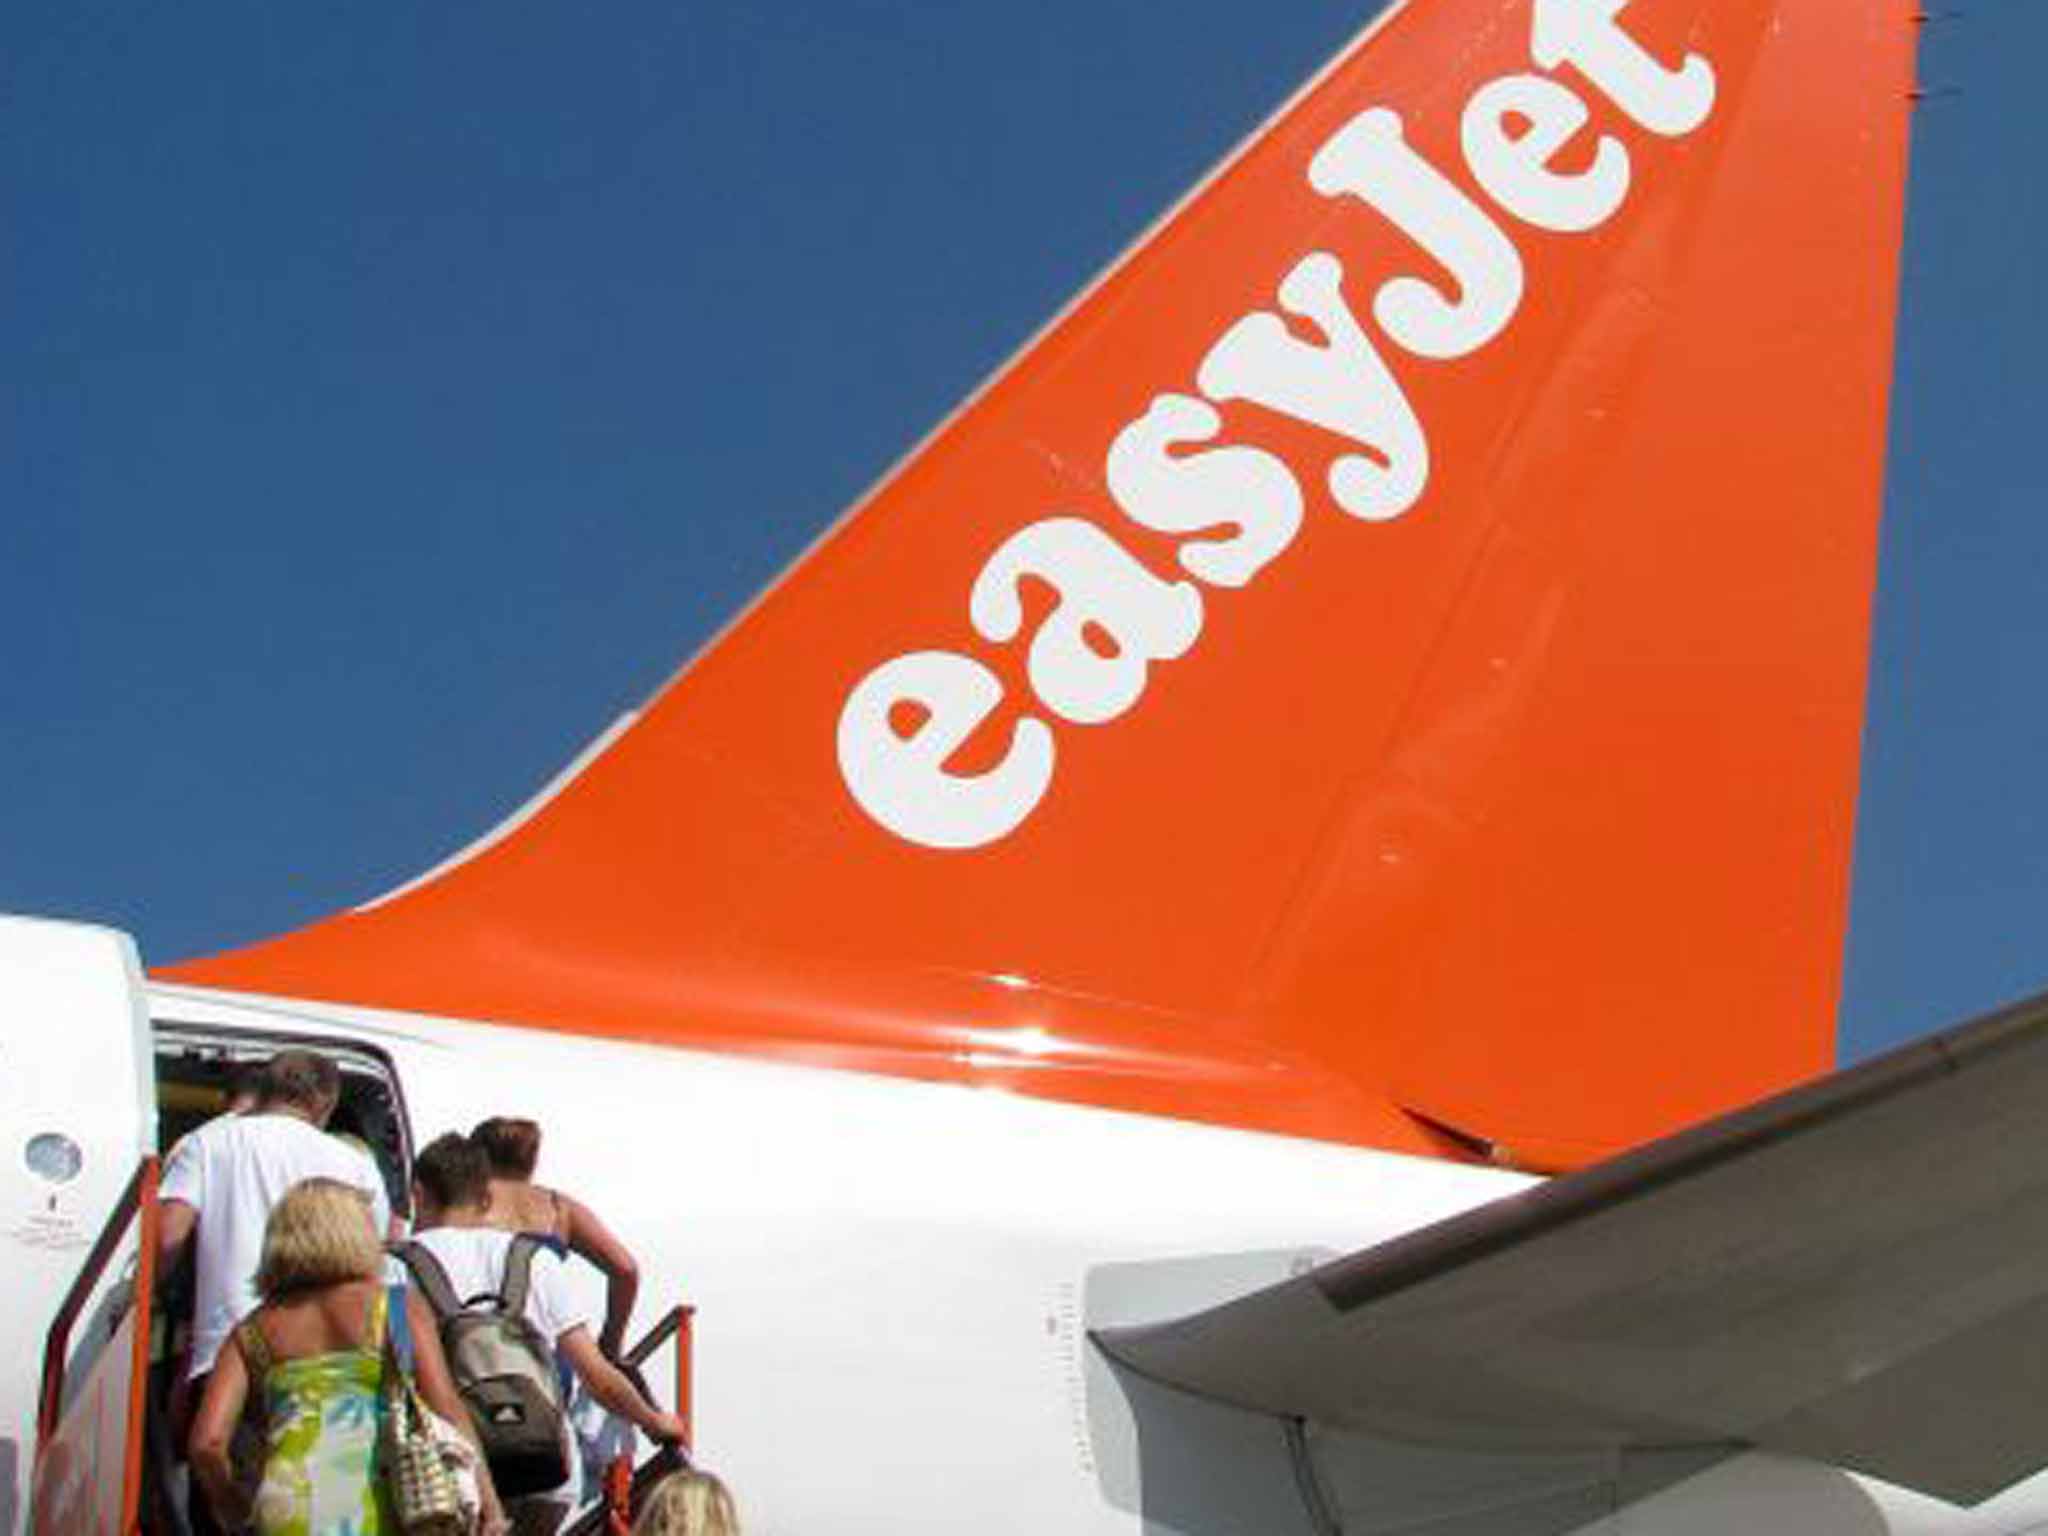 Wing man: Dr Southall came to the aid of an easyJet passenger